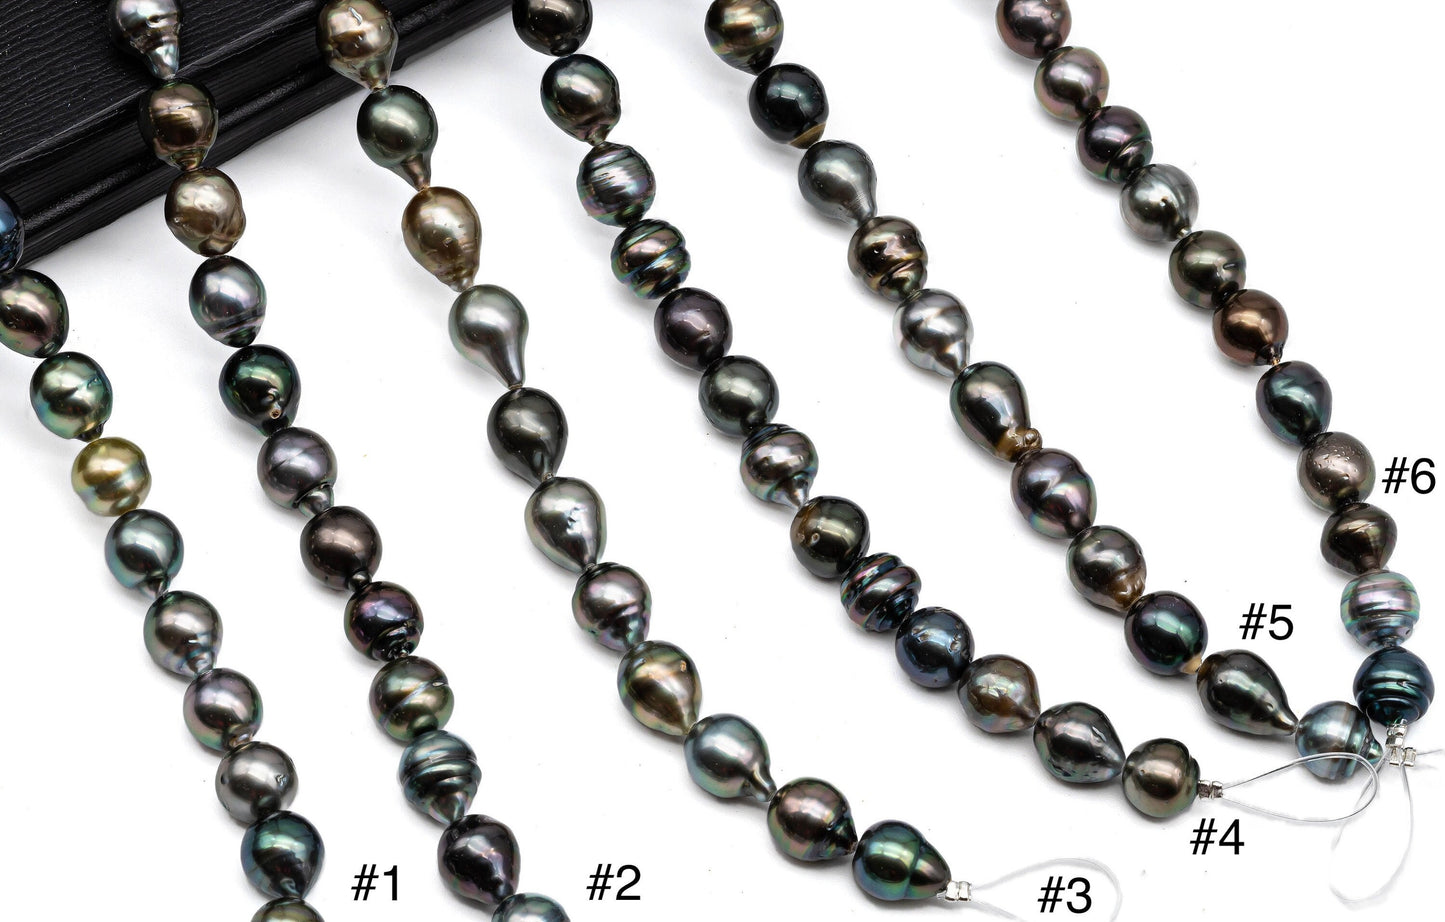 Black Tahitian Pearl, Circle Drops Pearl Stand with High Luster and Blemishes, For Jewelry Making, 9-9.5mm Full Strand, SKU# 1057TH